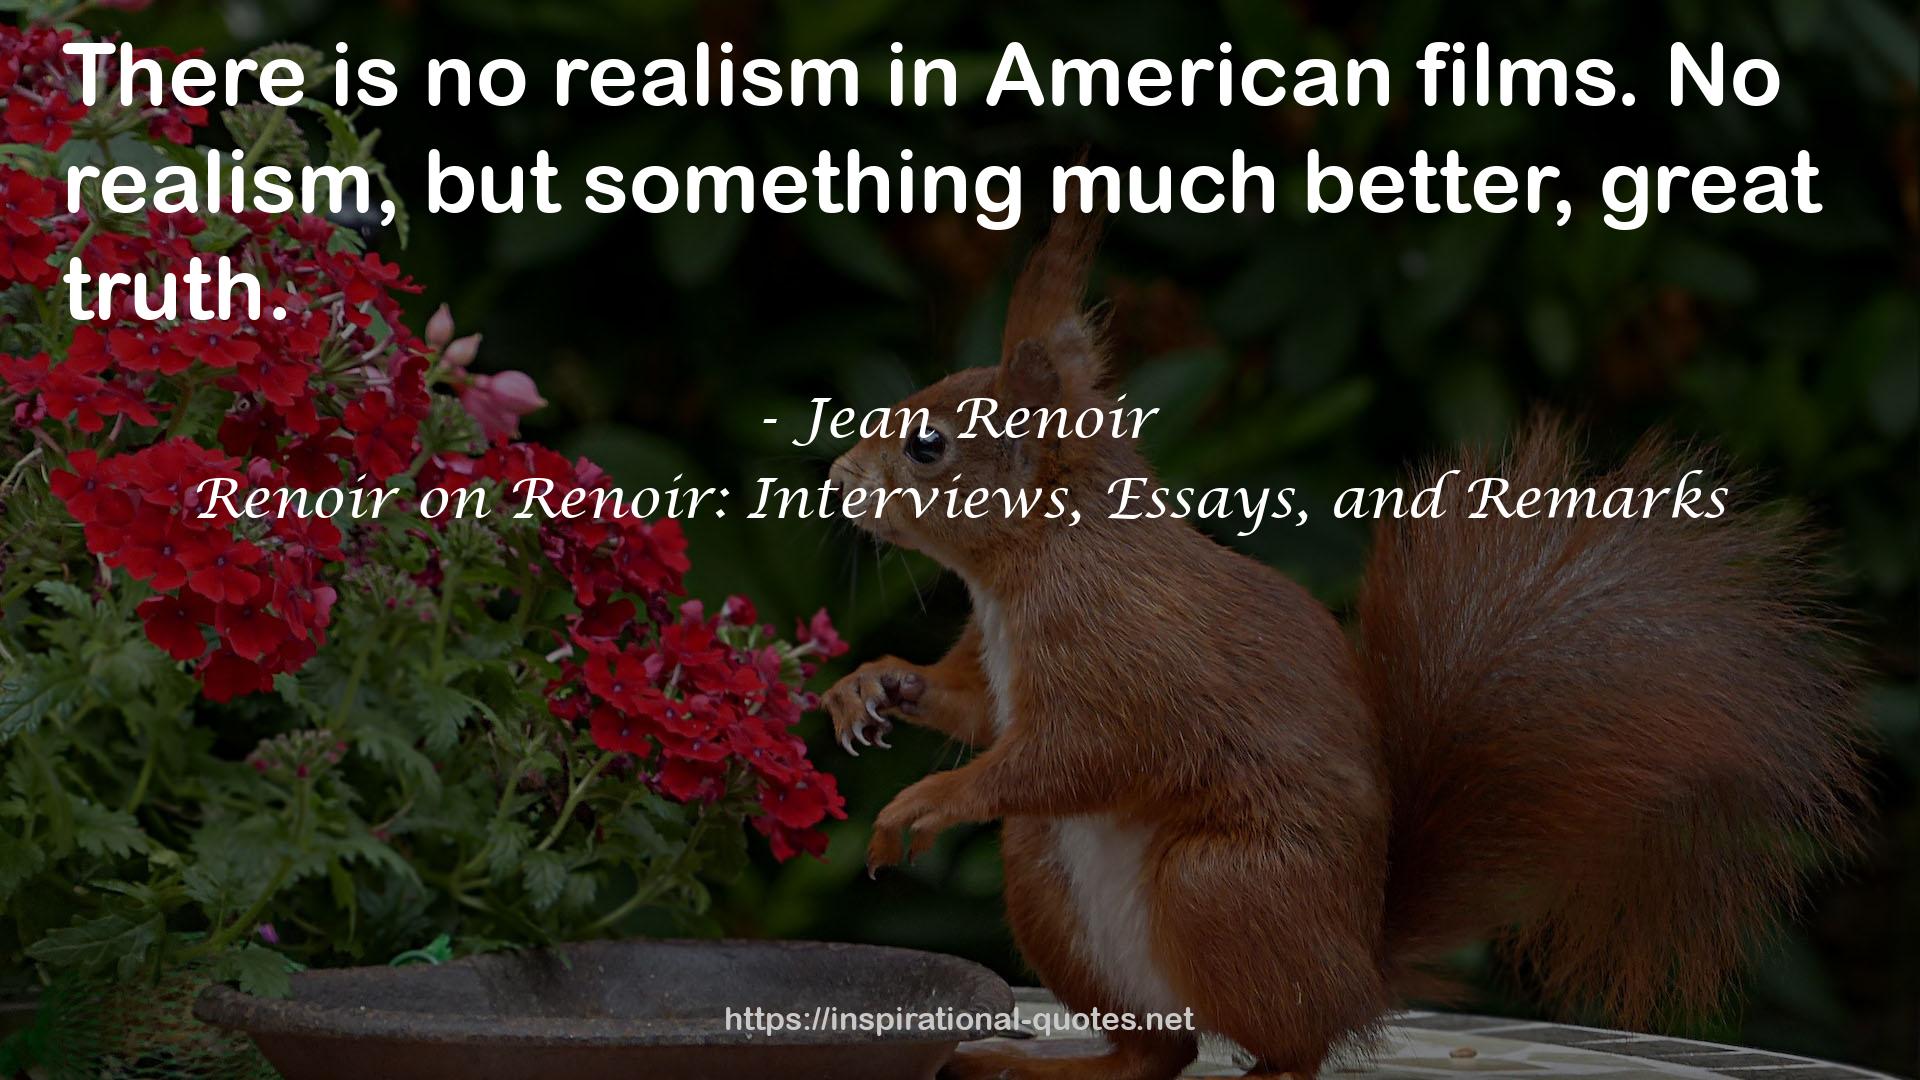 Renoir on Renoir: Interviews, Essays, and Remarks QUOTES